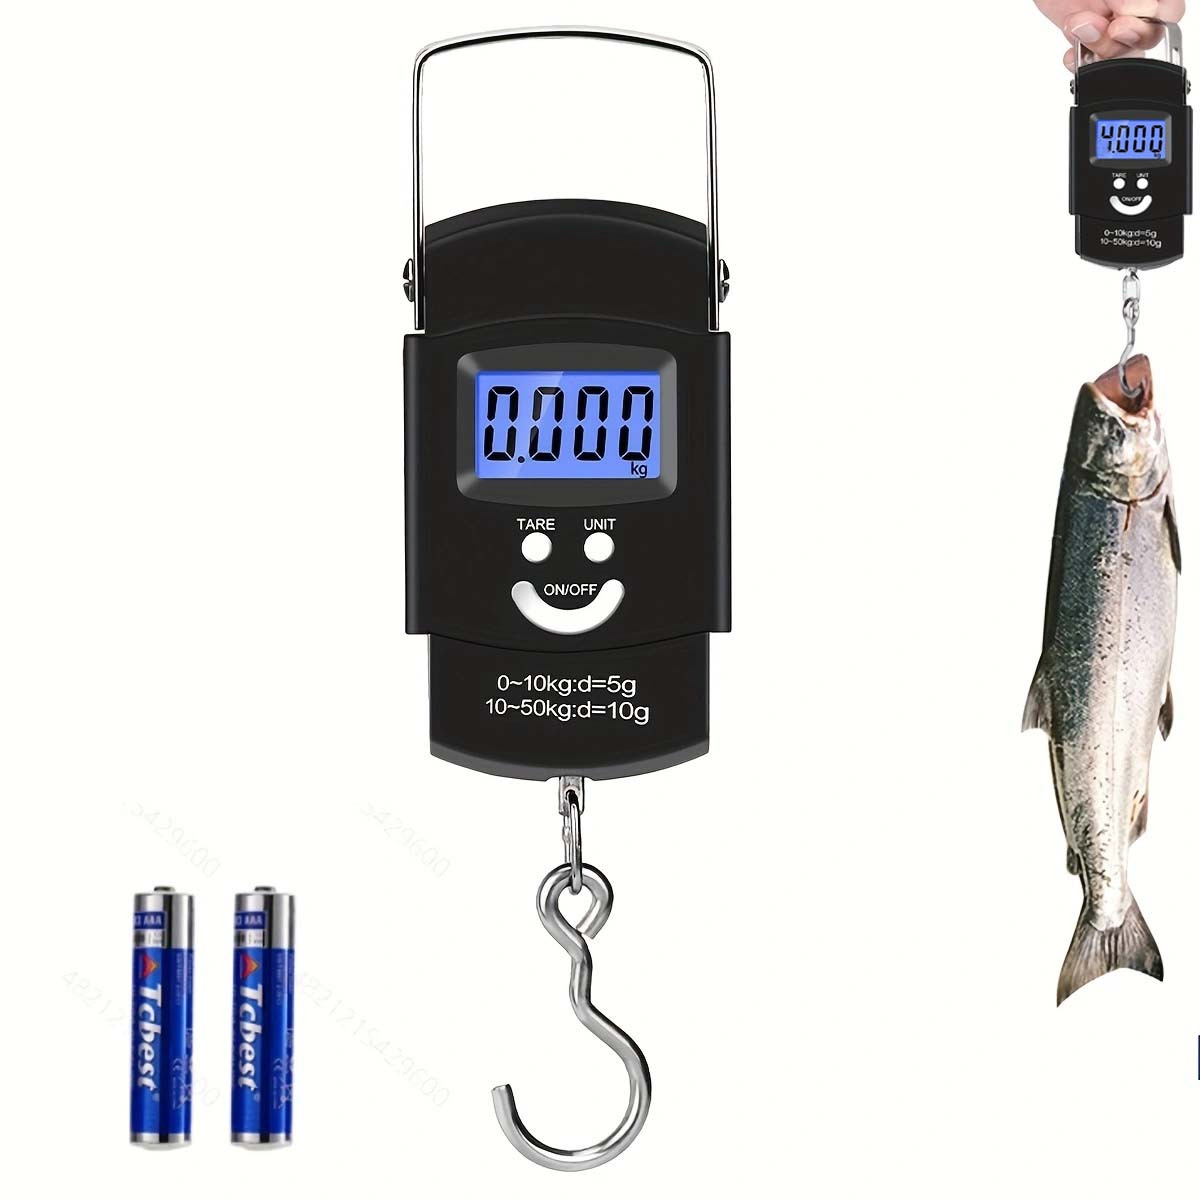 Backlit LCD Fishing Scale - Accurate Electronic Balance for Fishing,  Postal, and Travel - 110lb/50kg Capacity with Hanging Hook and 2 AAA  Batteries In